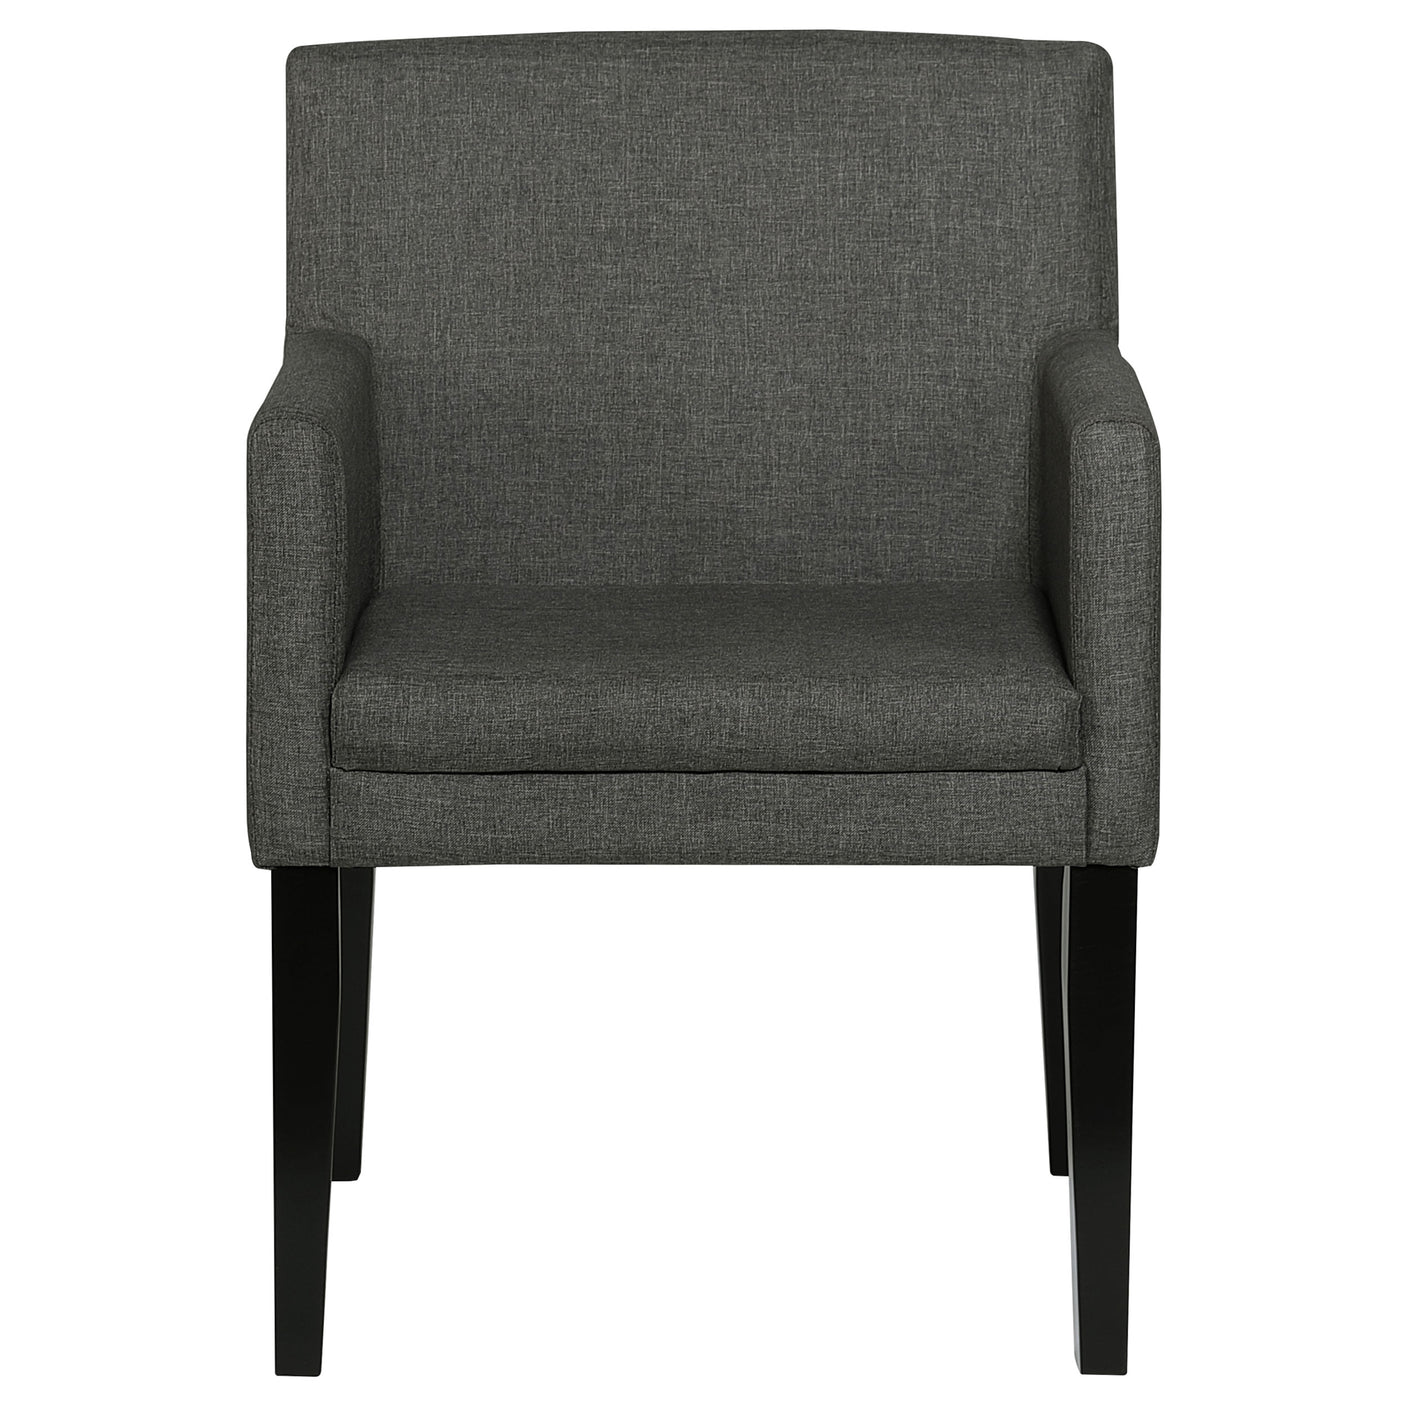 Arm Chair - Catherine Upholstered Dining Arm Chair Charcoal Grey and Black (Set of 2)